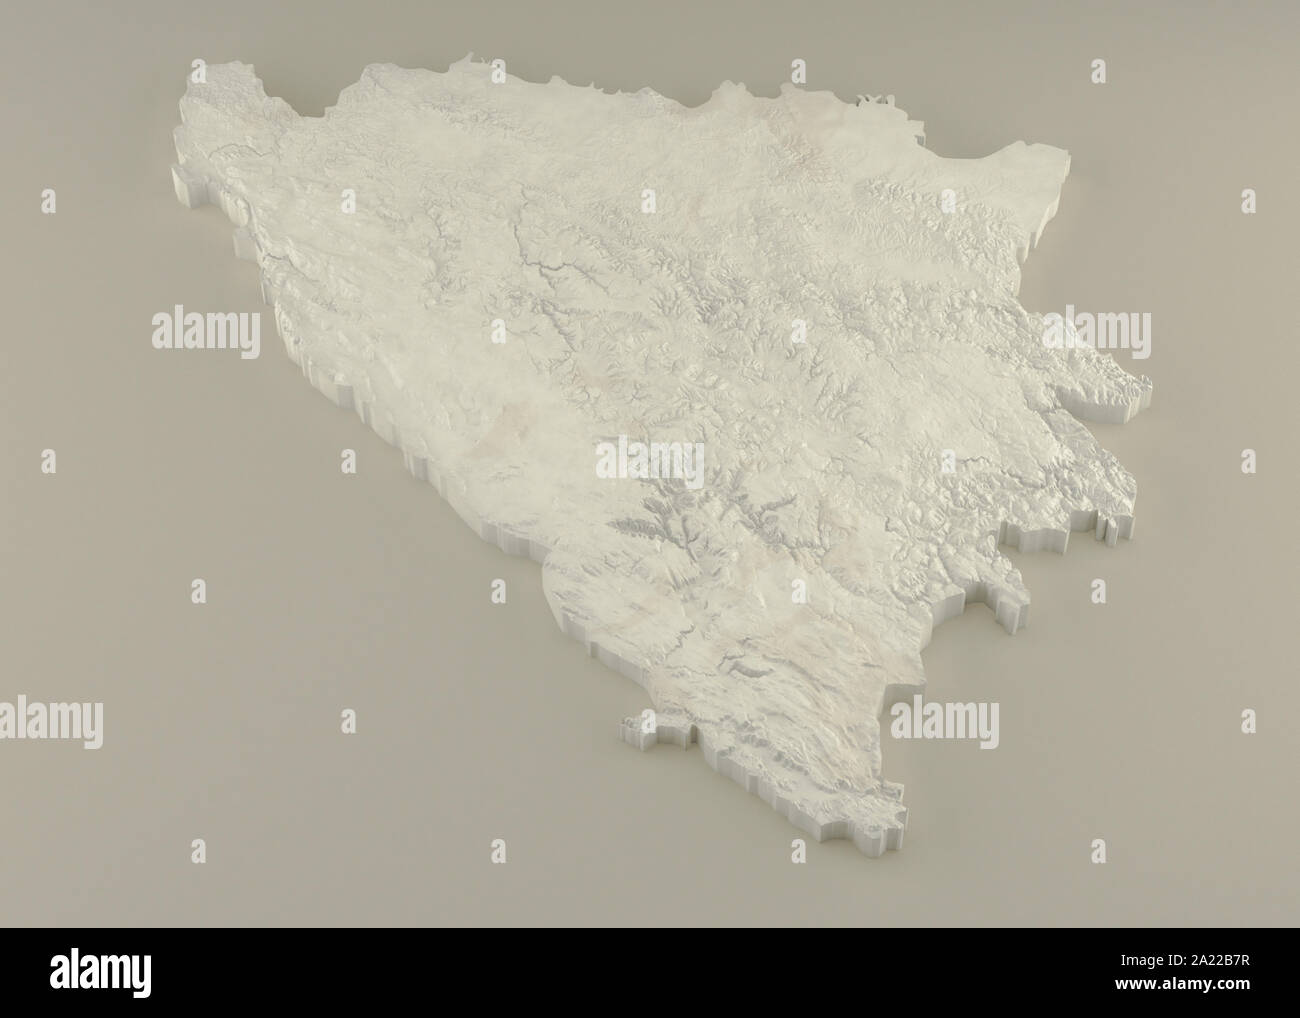 Extruded 3D political Map of Bosnia and Herzegovina with relief as marble sculpture on a light beige background Stock Photo